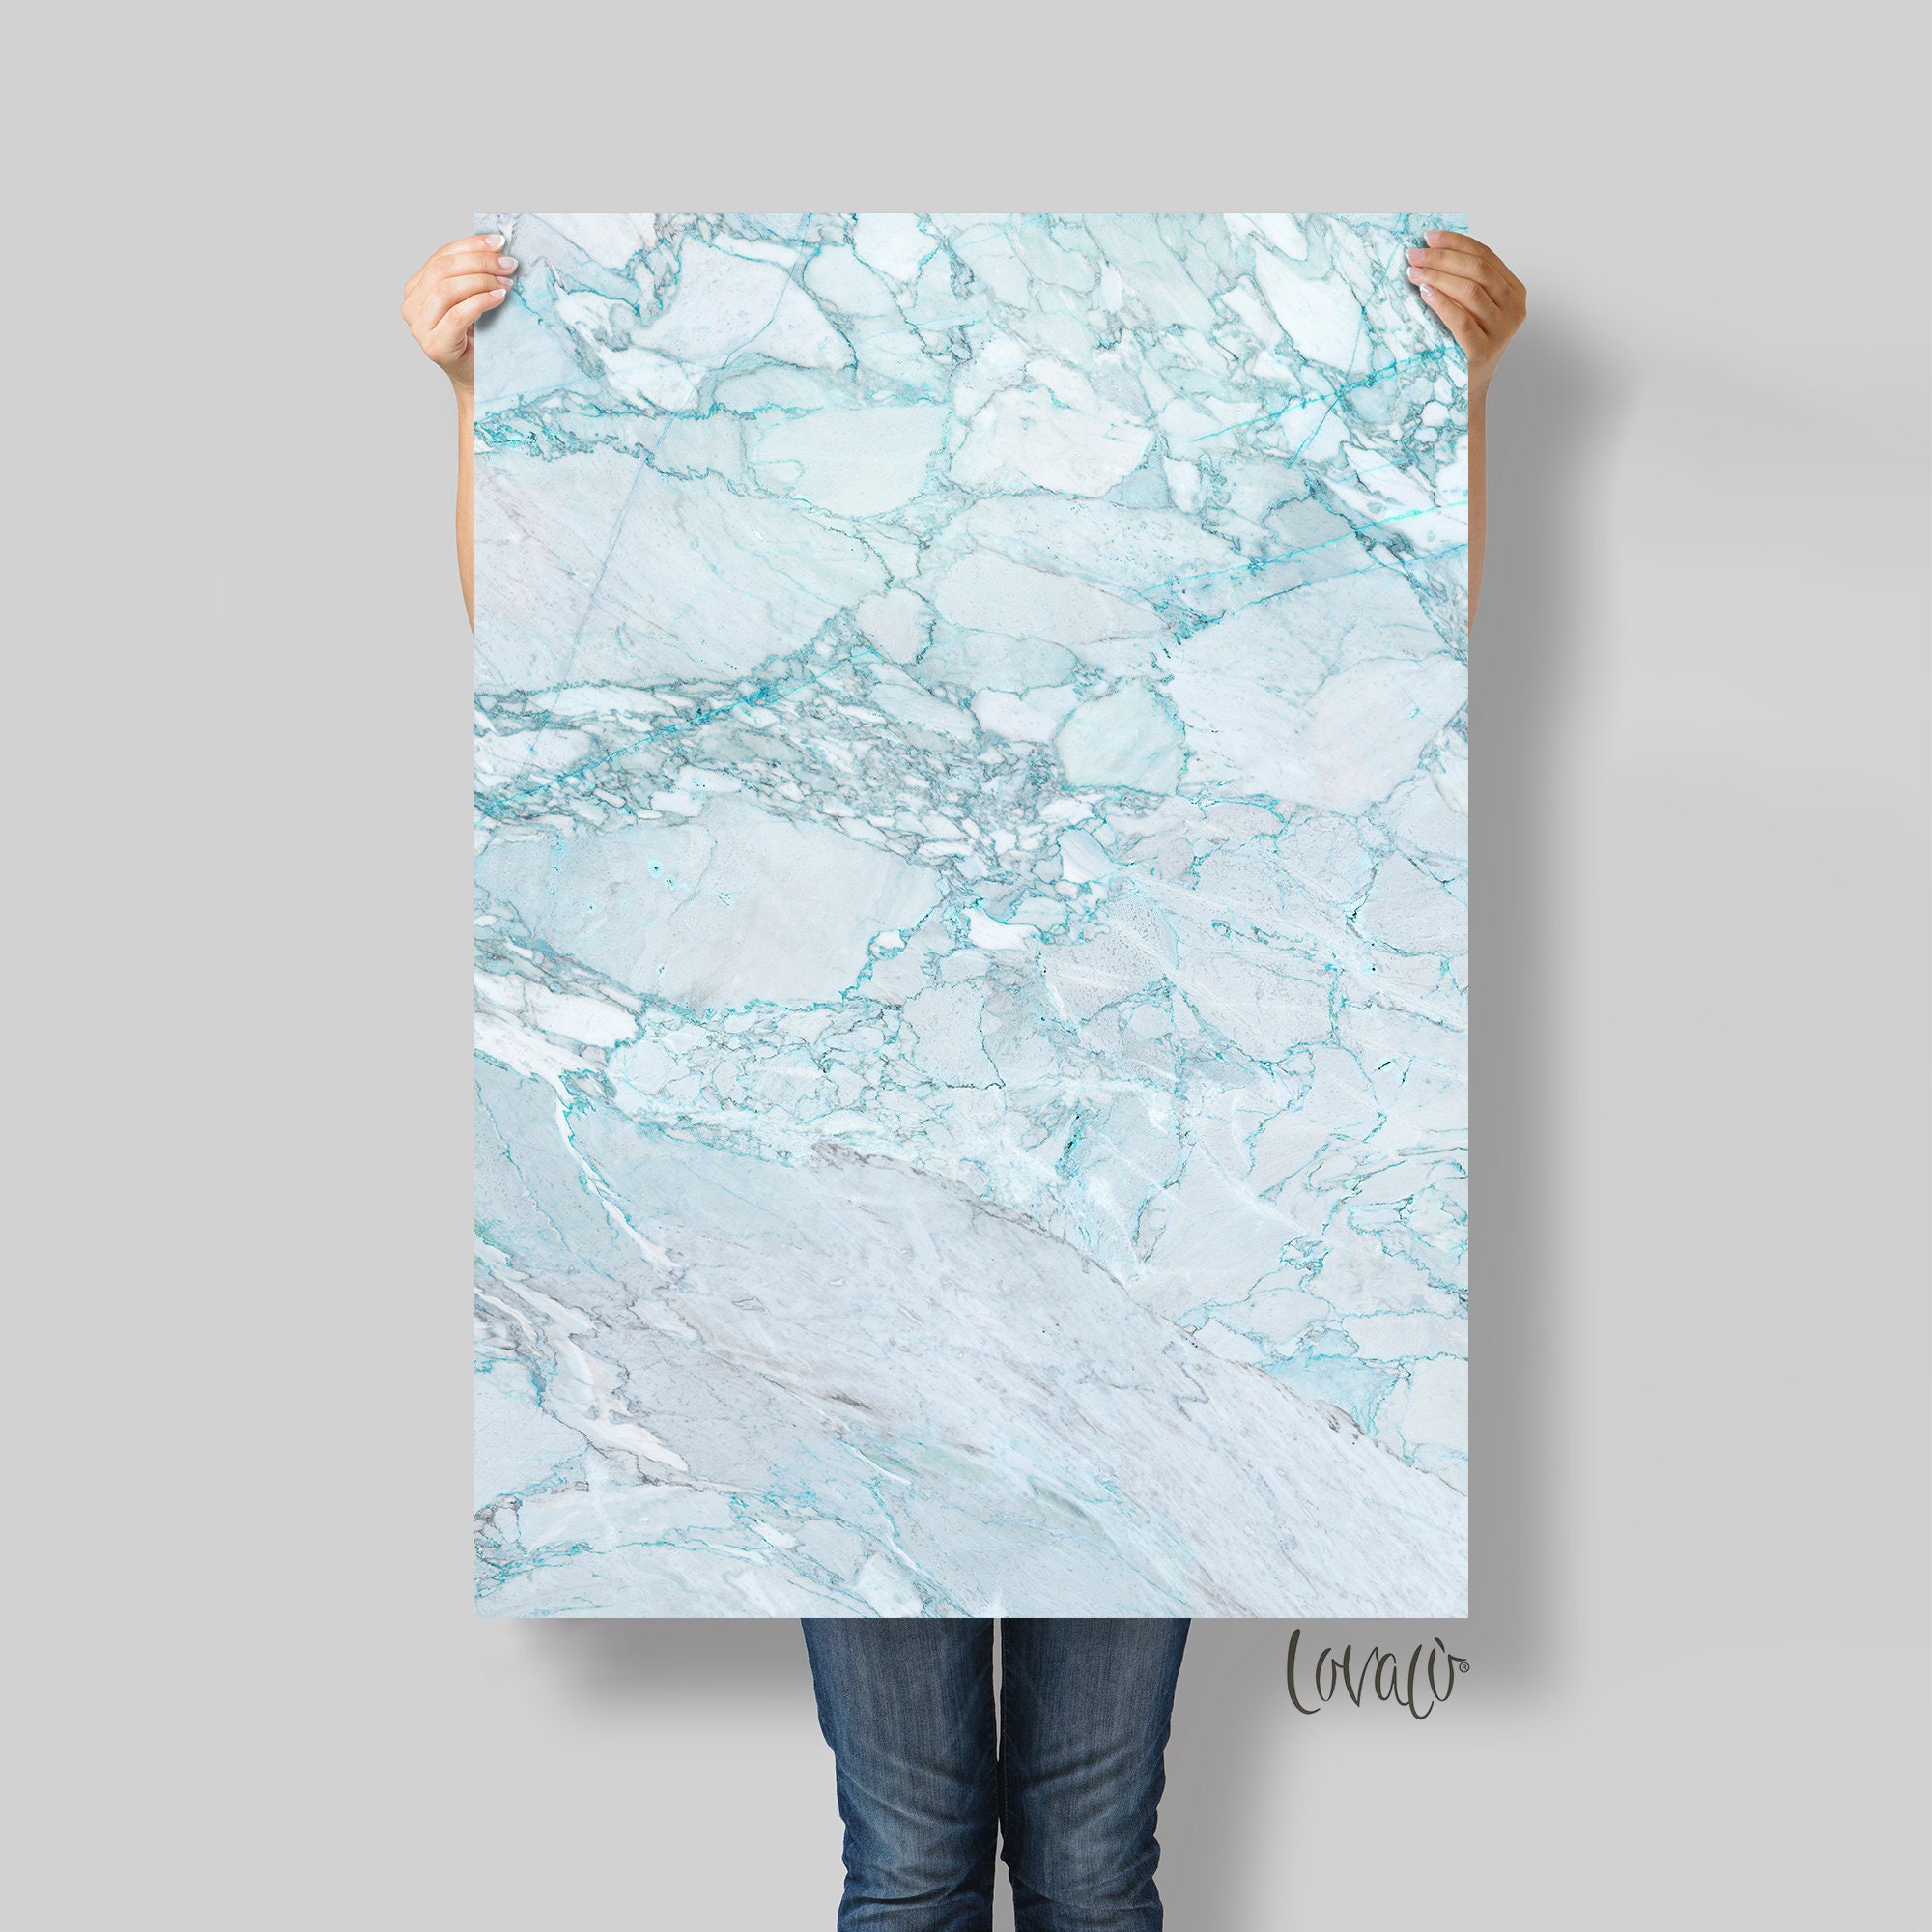 Light Blue Marble Food Photography Backdrop White Concrete for Product,  Instagram, Flat Lay & Food Photography Lov3060 